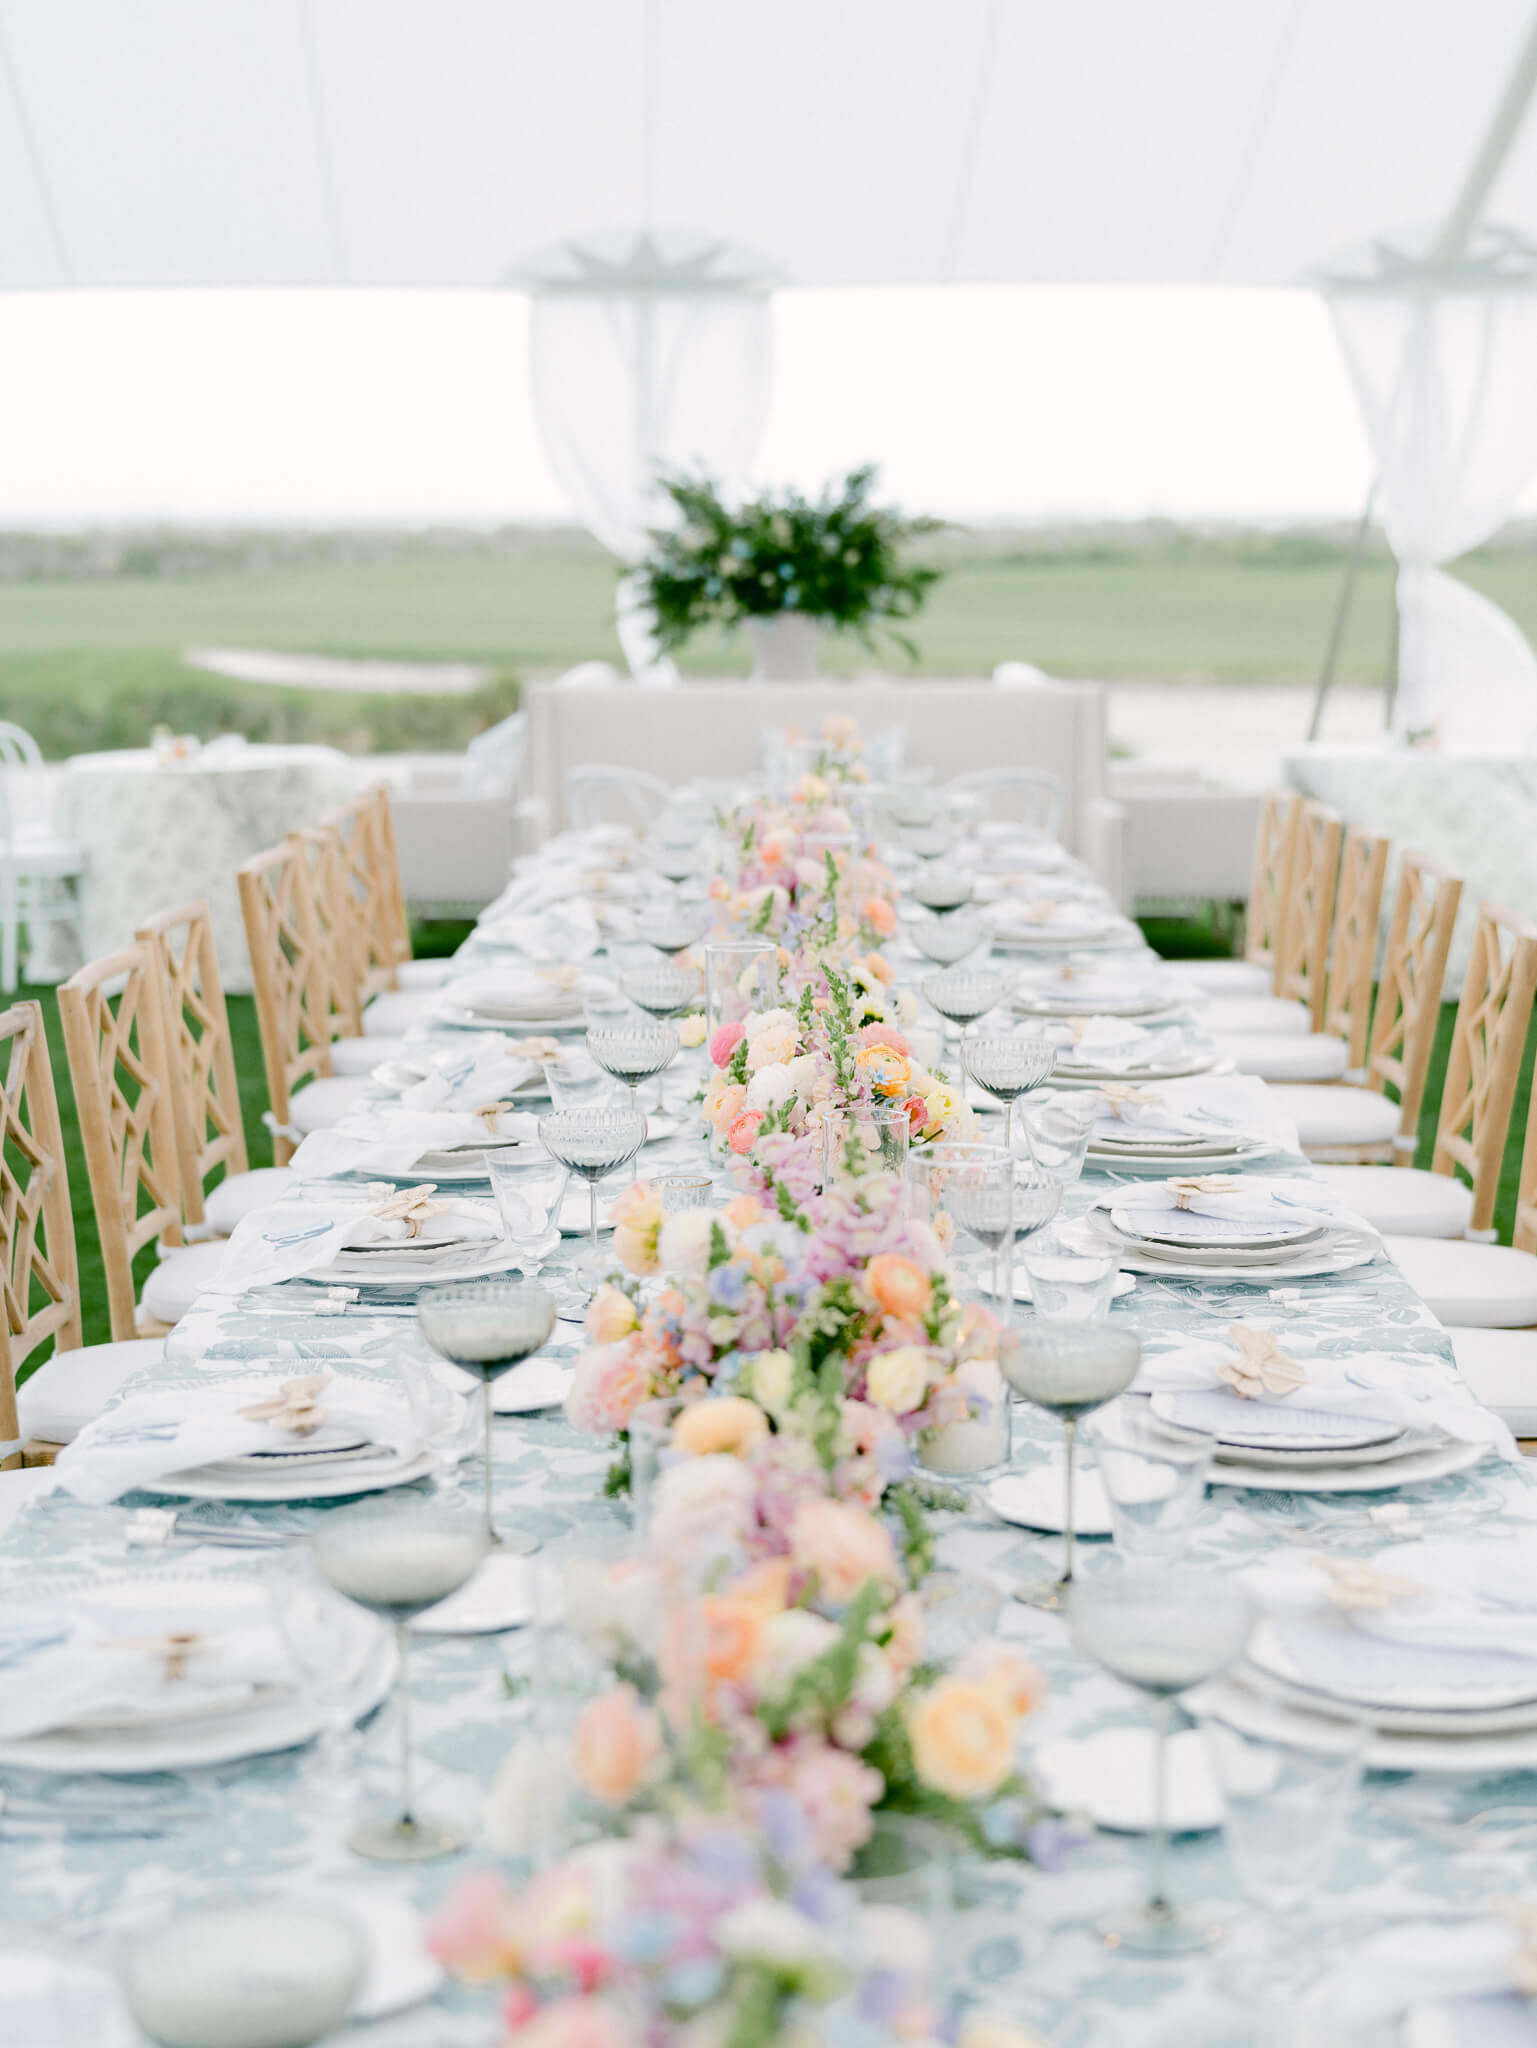 A long reception table lined with colorful pastel flowers, white plates and a blue and white floral table cloth.